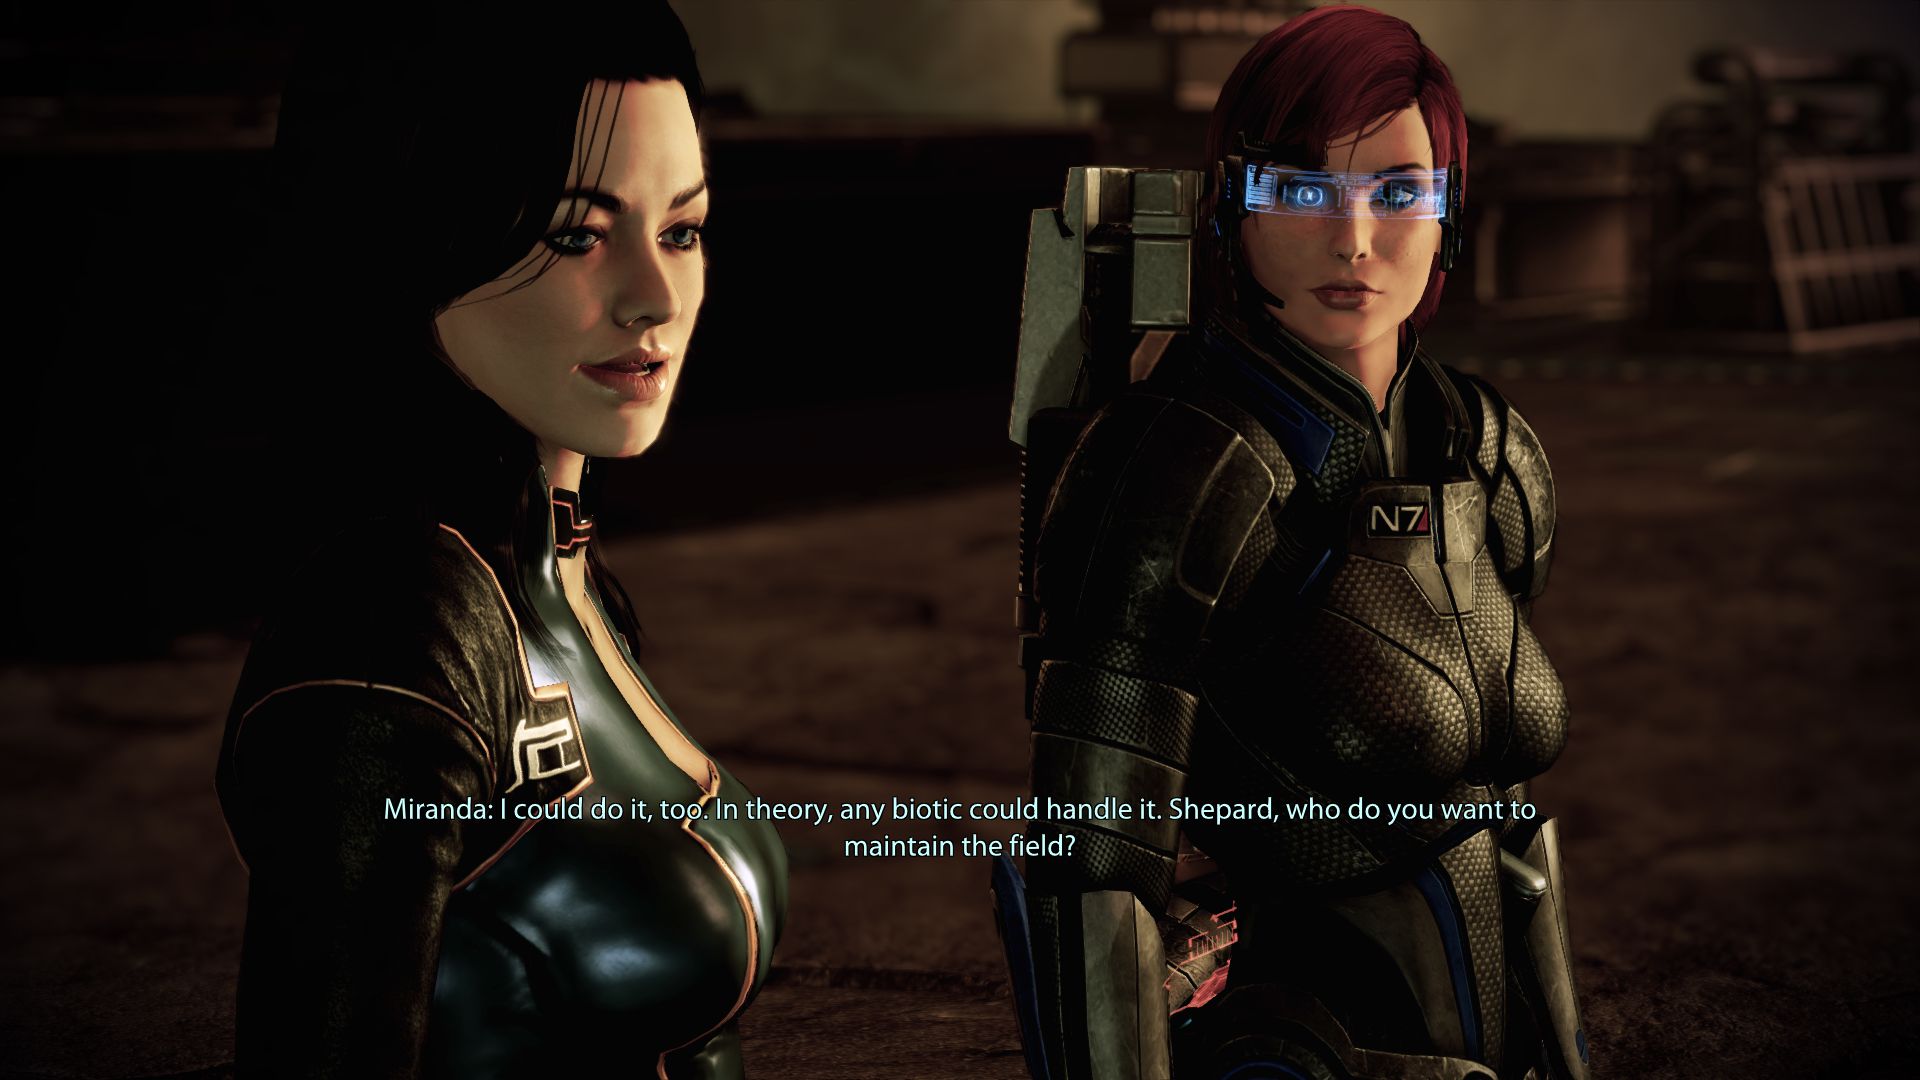 Justice for Miranda finally achieved, thanks to Mass Effect mod